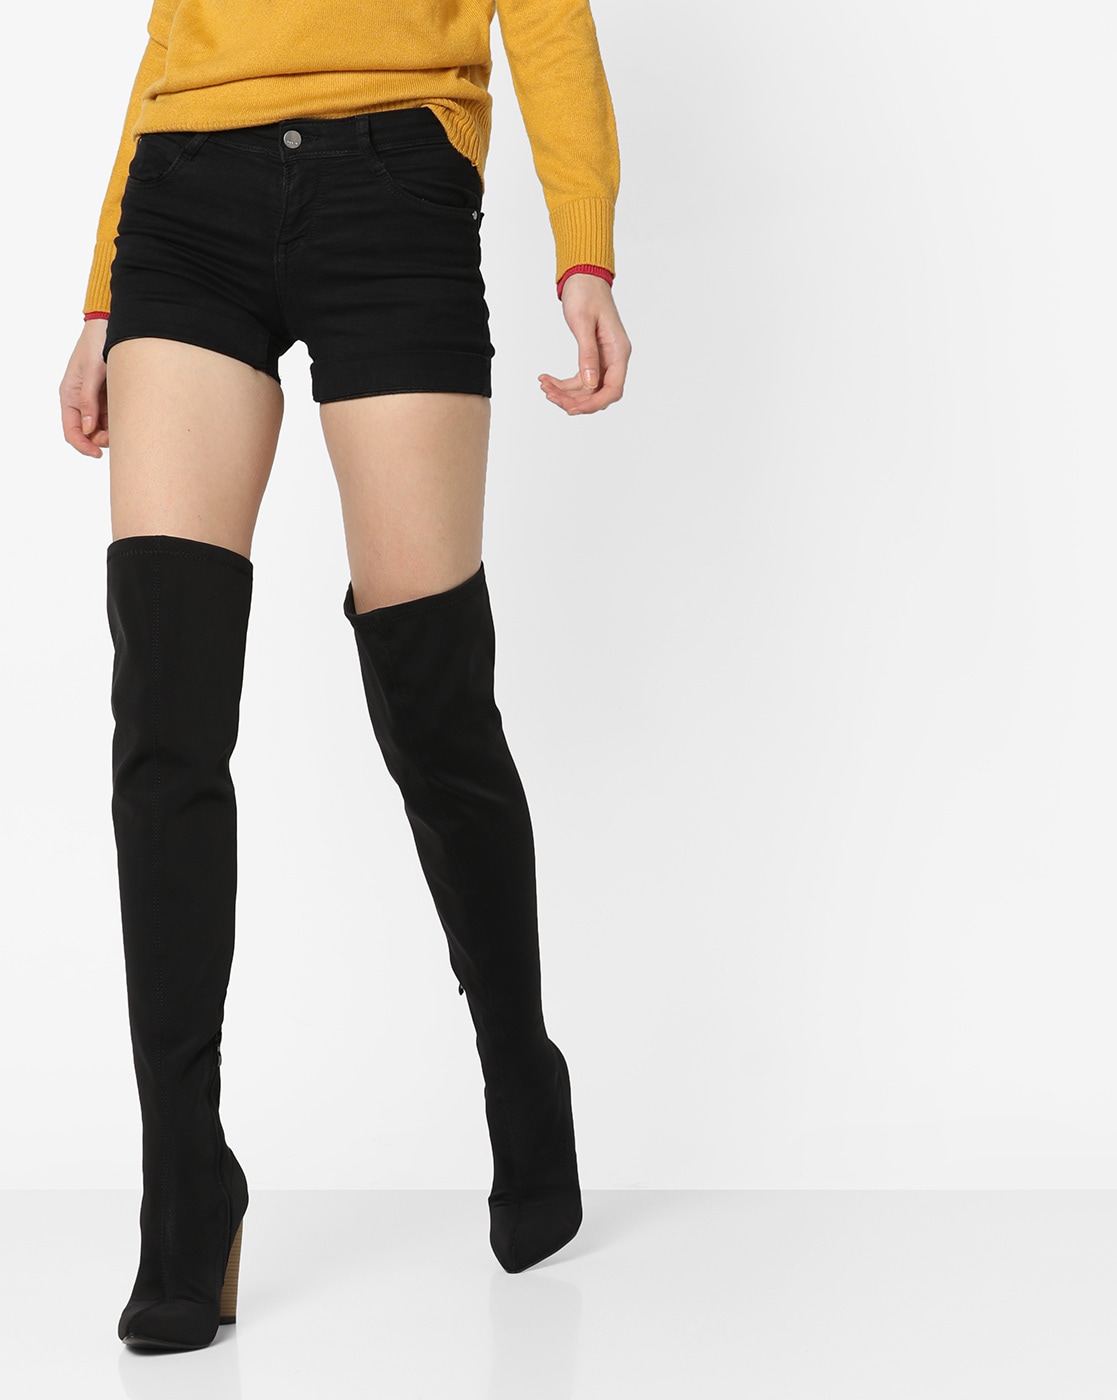 thigh length boots